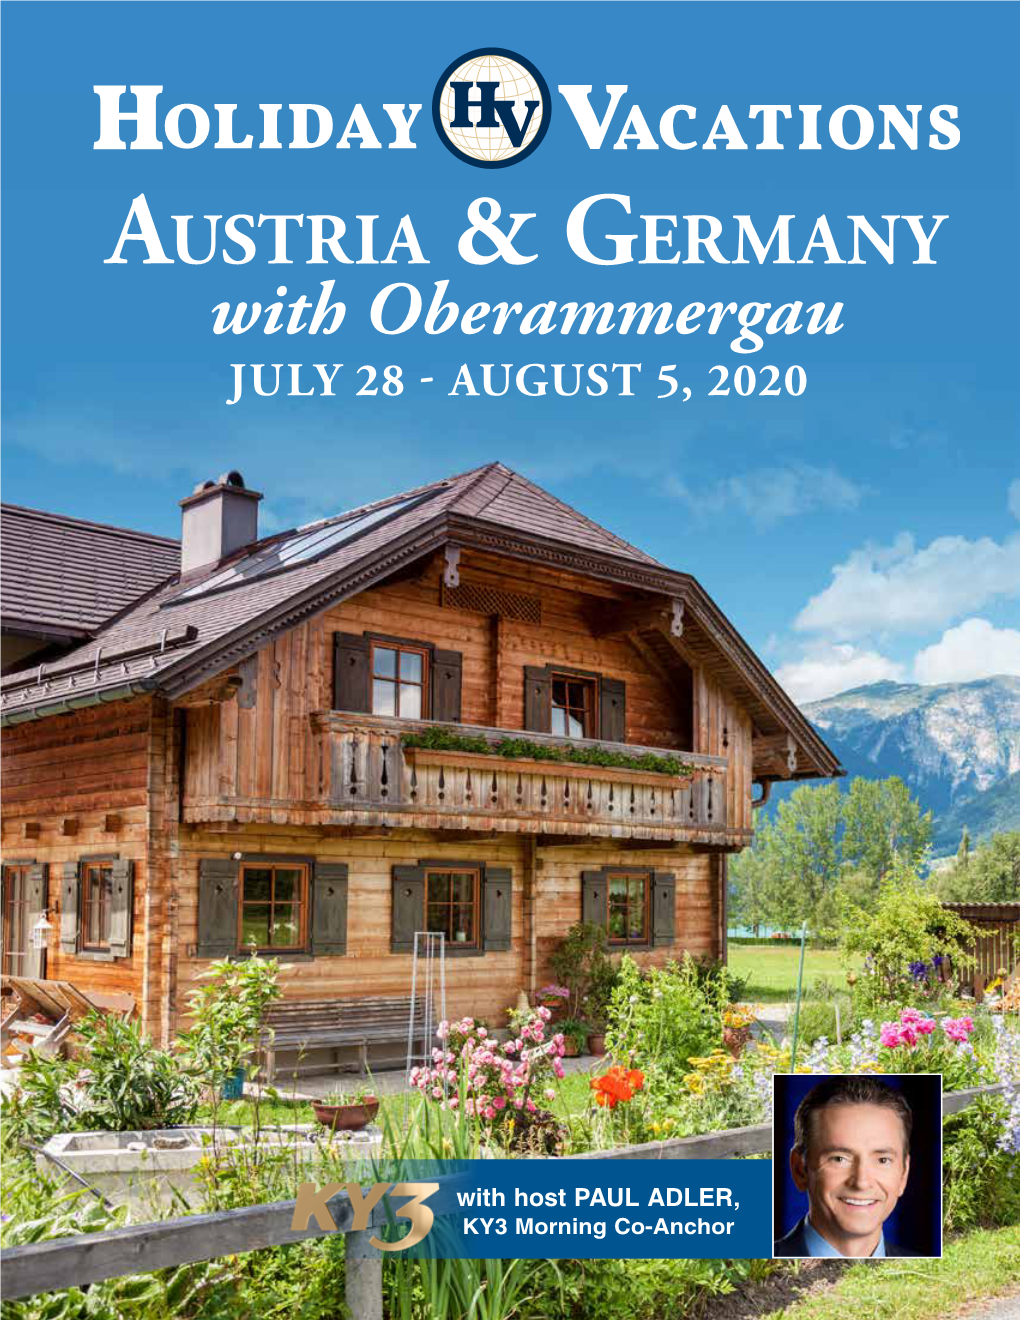 With Oberammergau JULY 28 - AUGUST 5, 2020